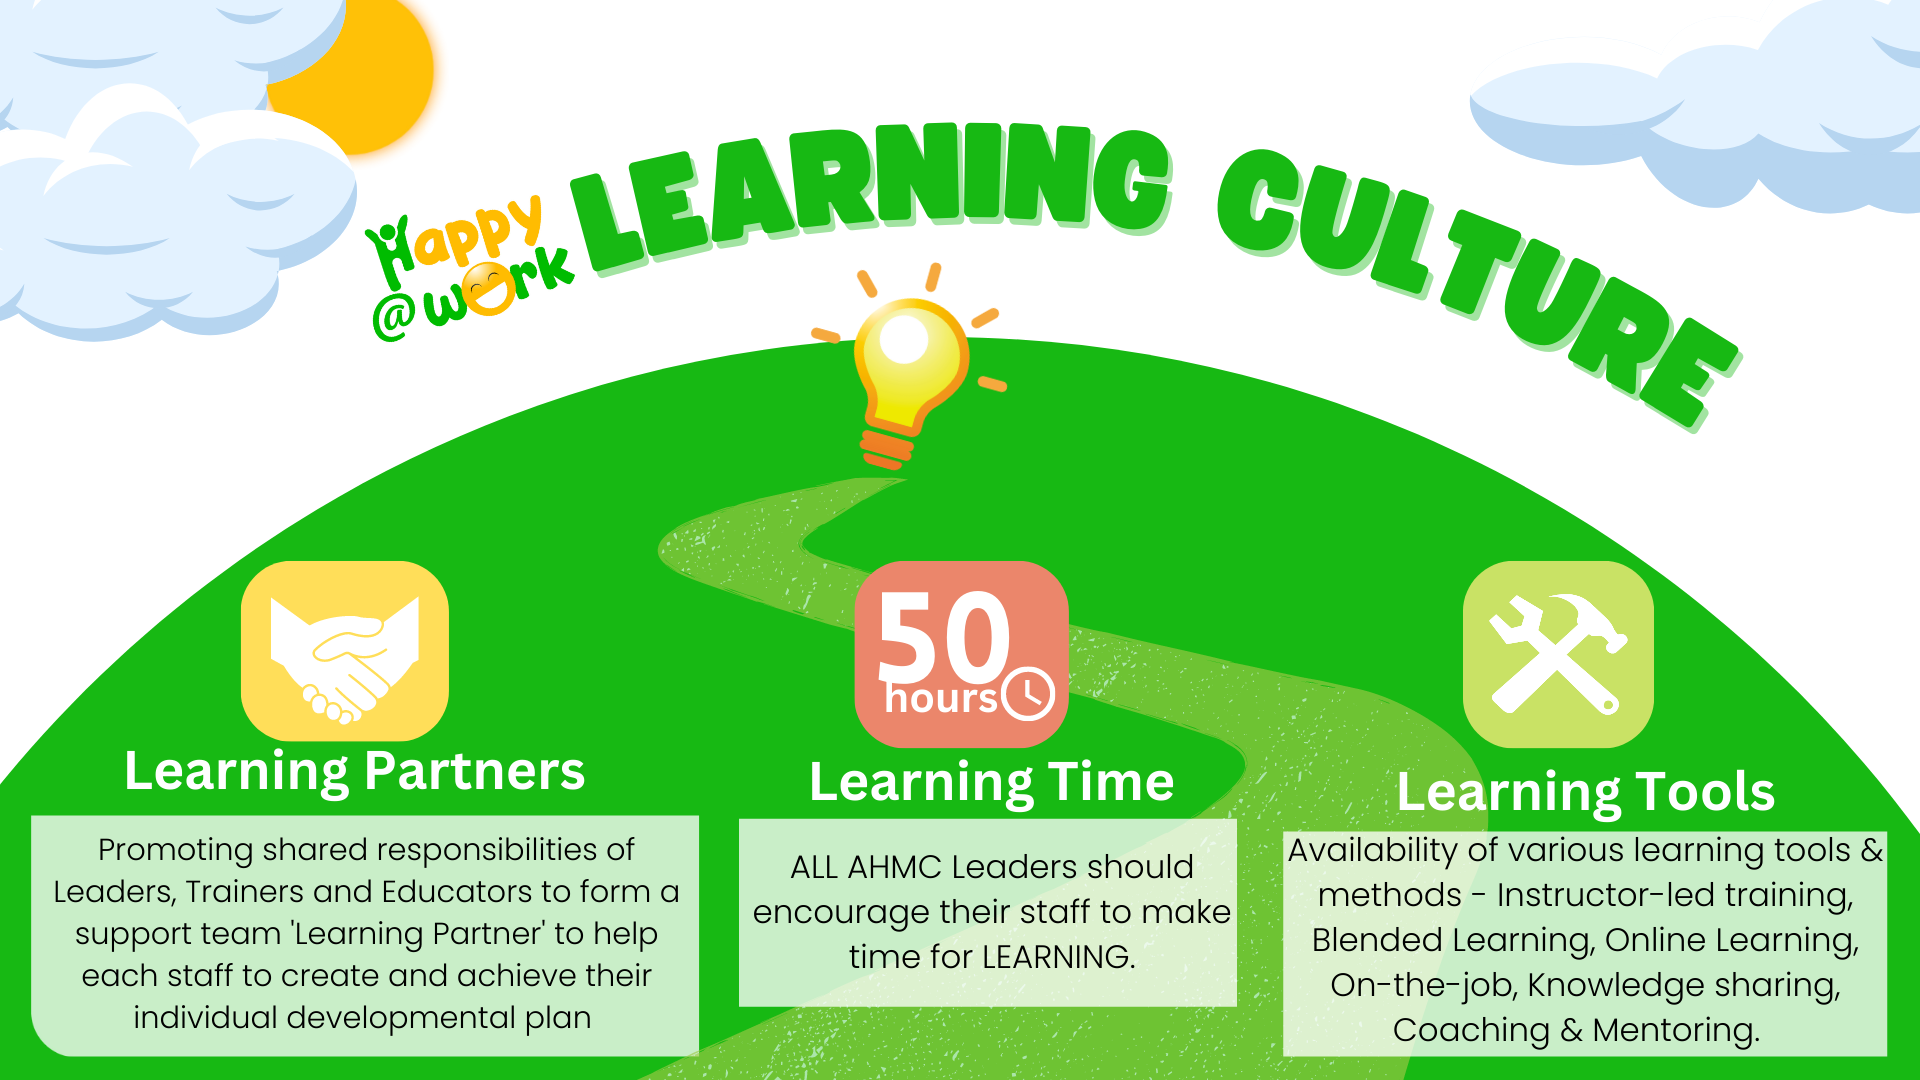 AHMC Learning Culture: EARN at least 50 hours learning time!